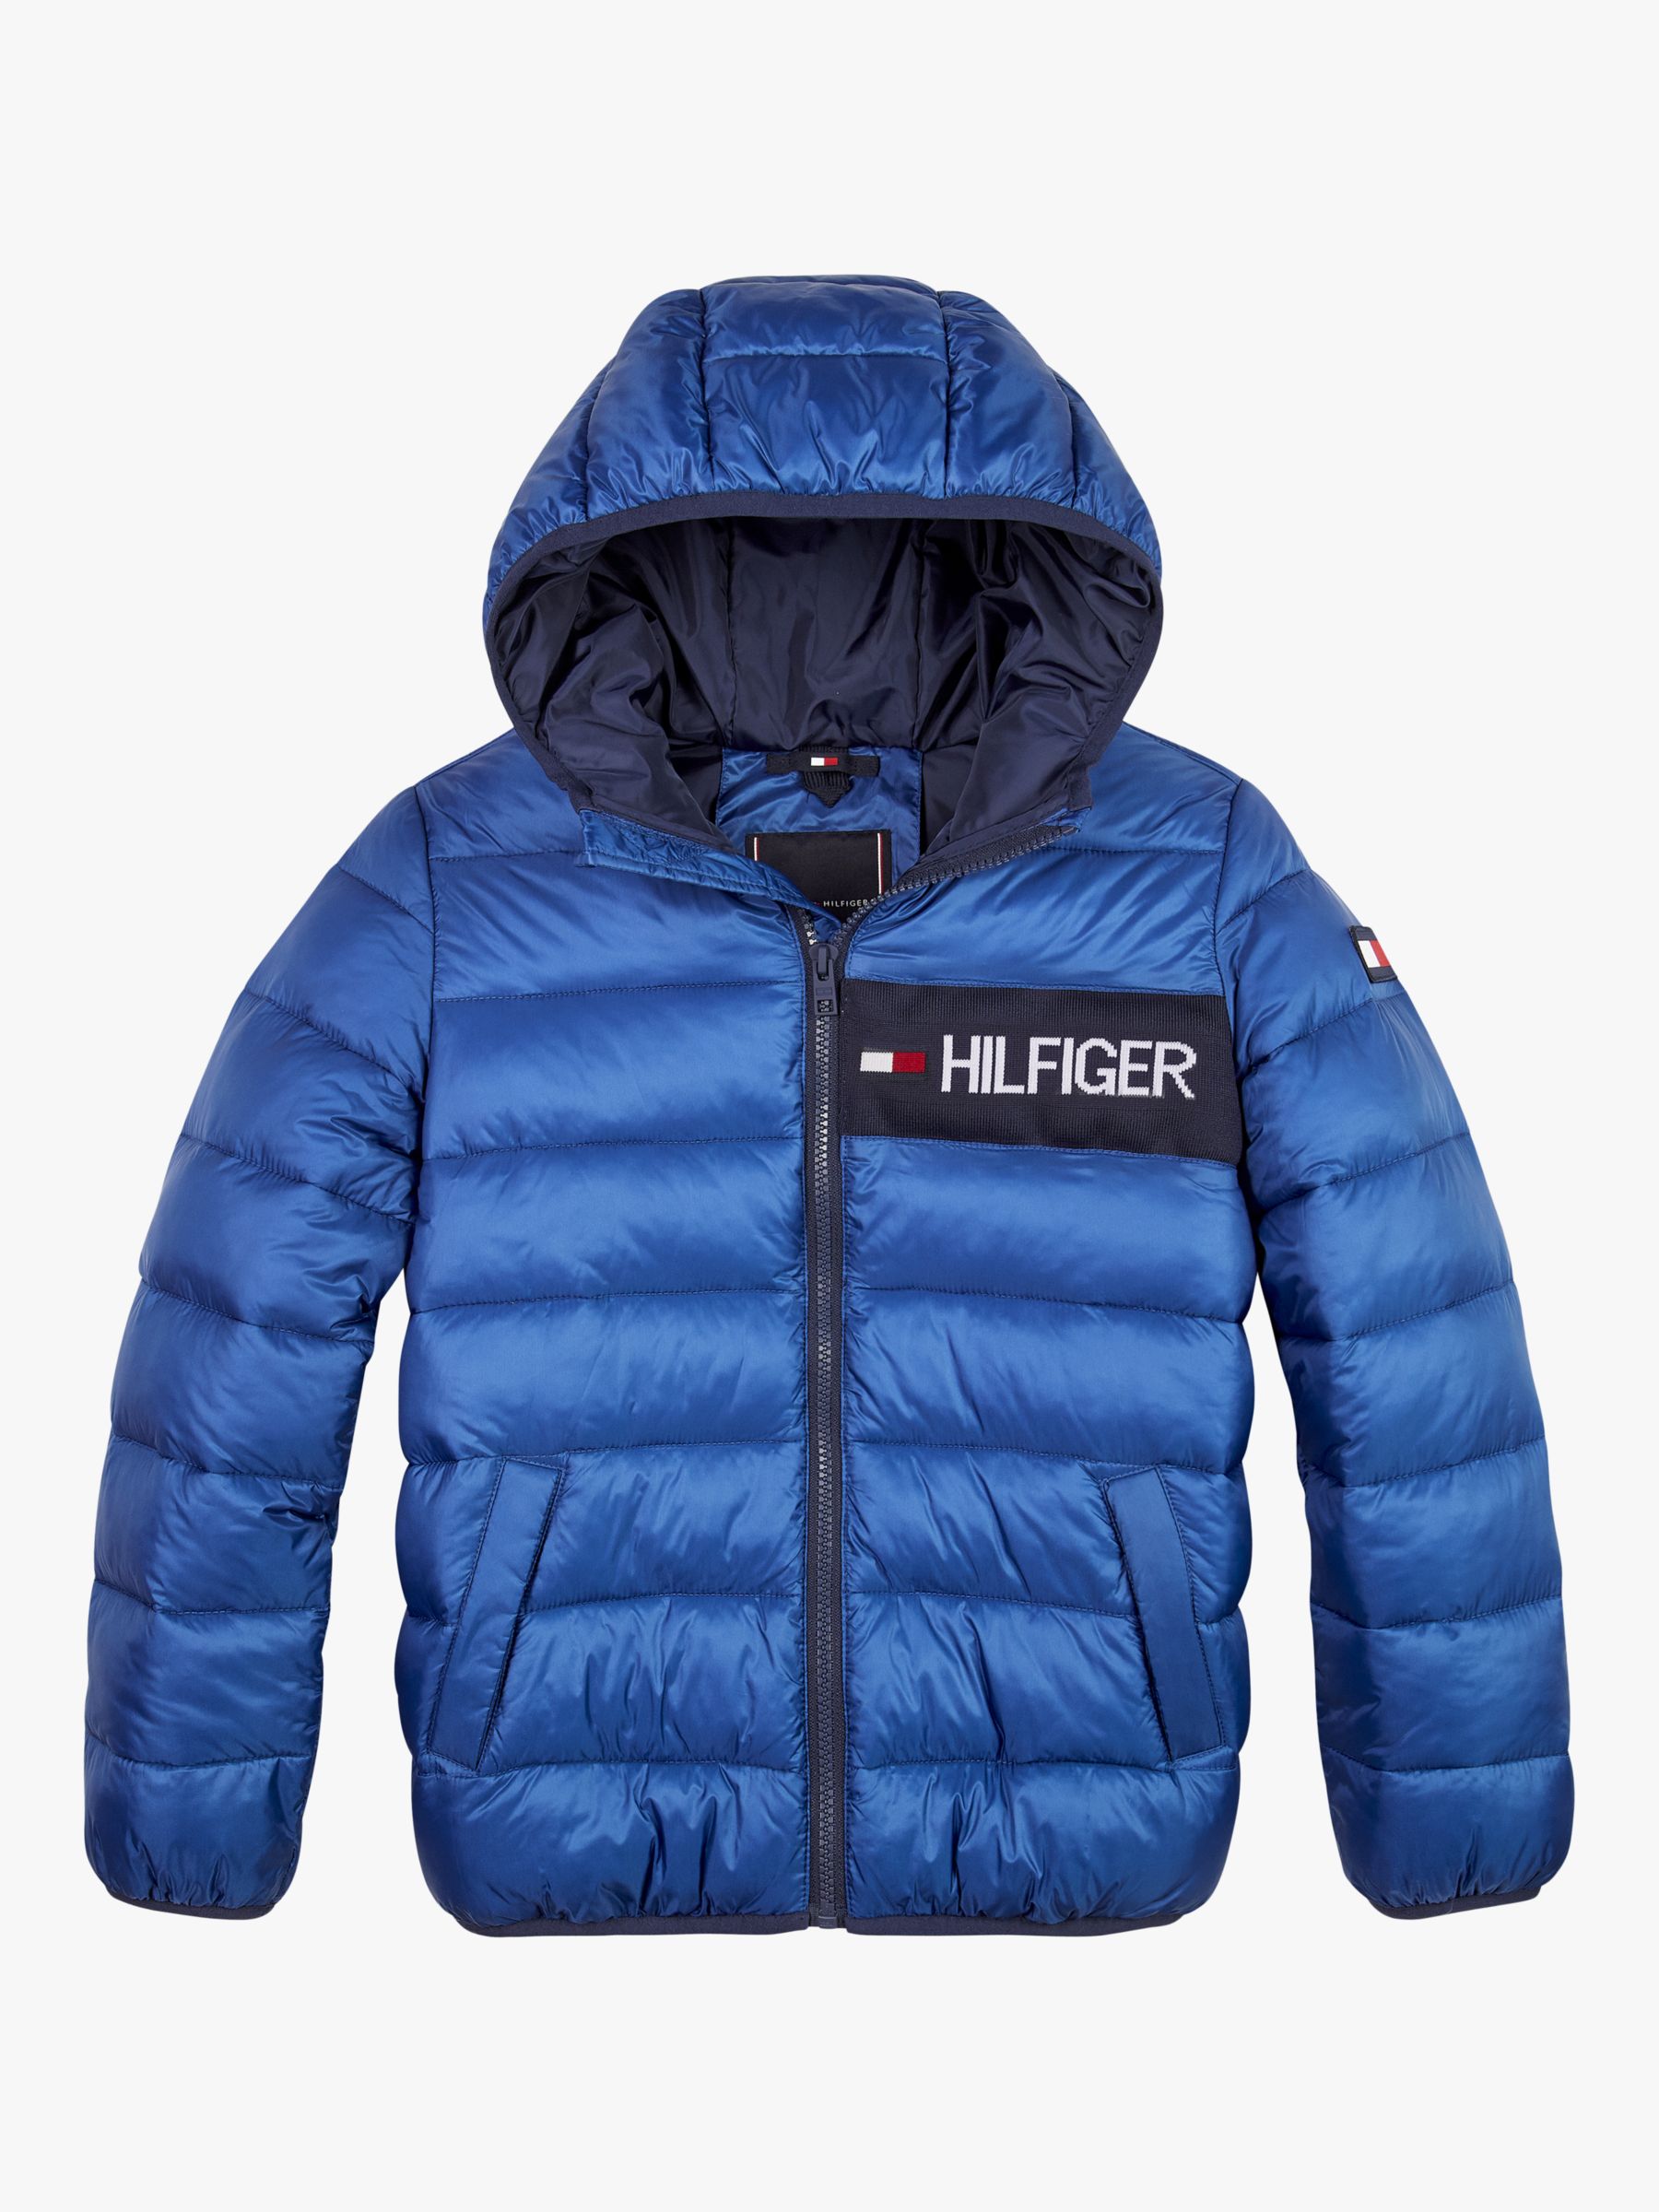 Tommy Hilfiger Boys' Essential Padded Jacket, Navy at John Lewis & Partners